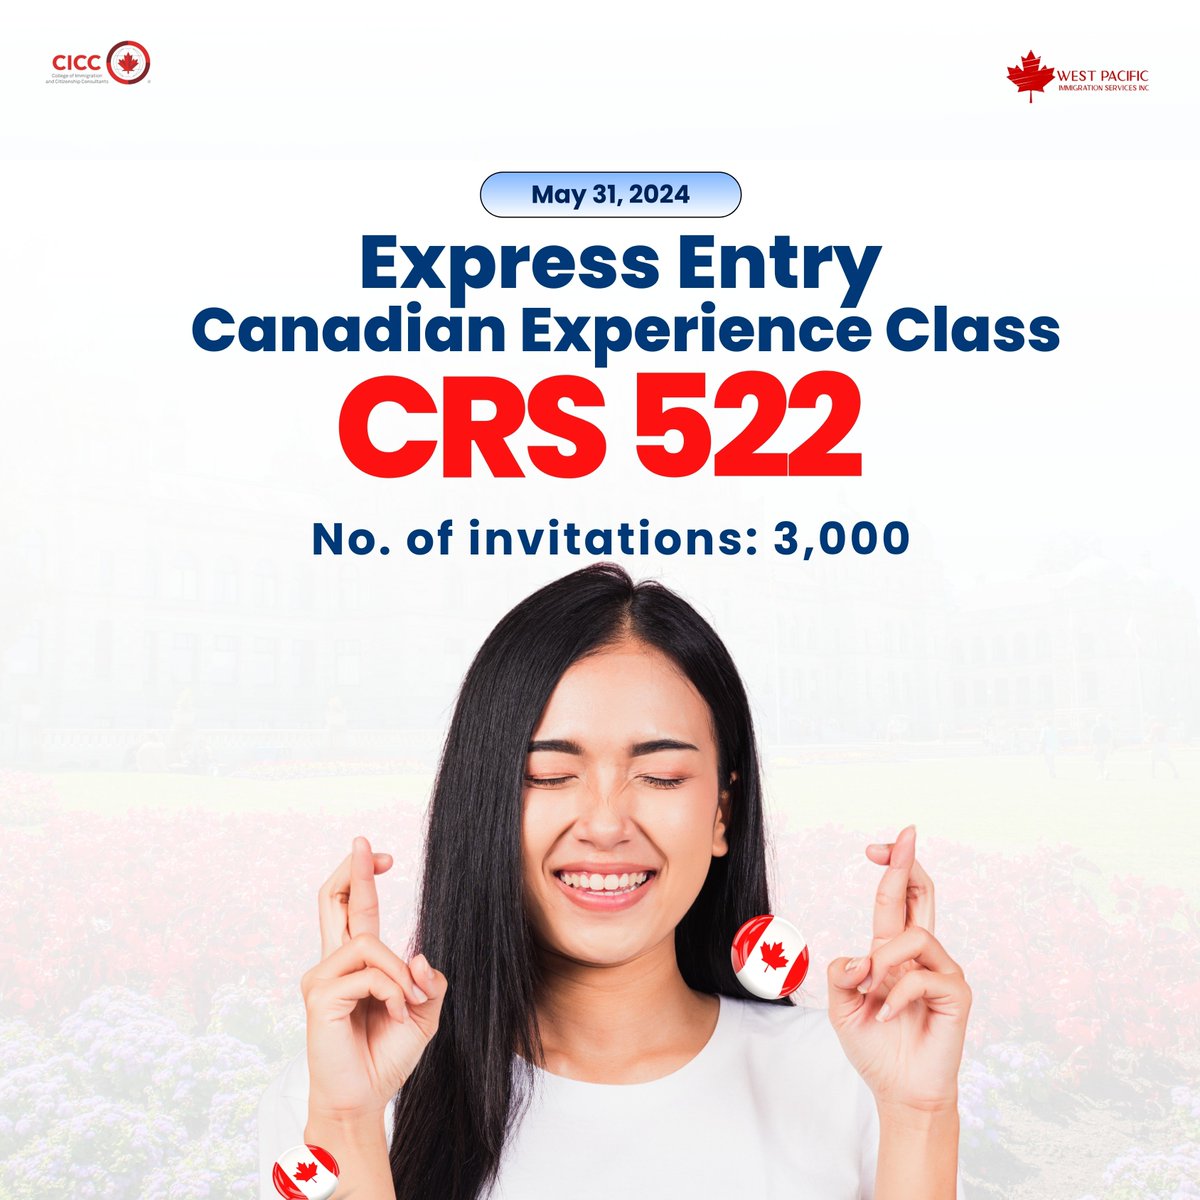 🌟 Express Entry Canadian Experience Class Draw!

📈 CRS score: 522

📨 3,000 invitations have been sent out

⏳CEC draws have begun, which is great news.

🎉 Congratulations to those who received invitations

#ExpressEntry #PNPDraw #CRS #HopefulForCEC #ImmigrationJourney